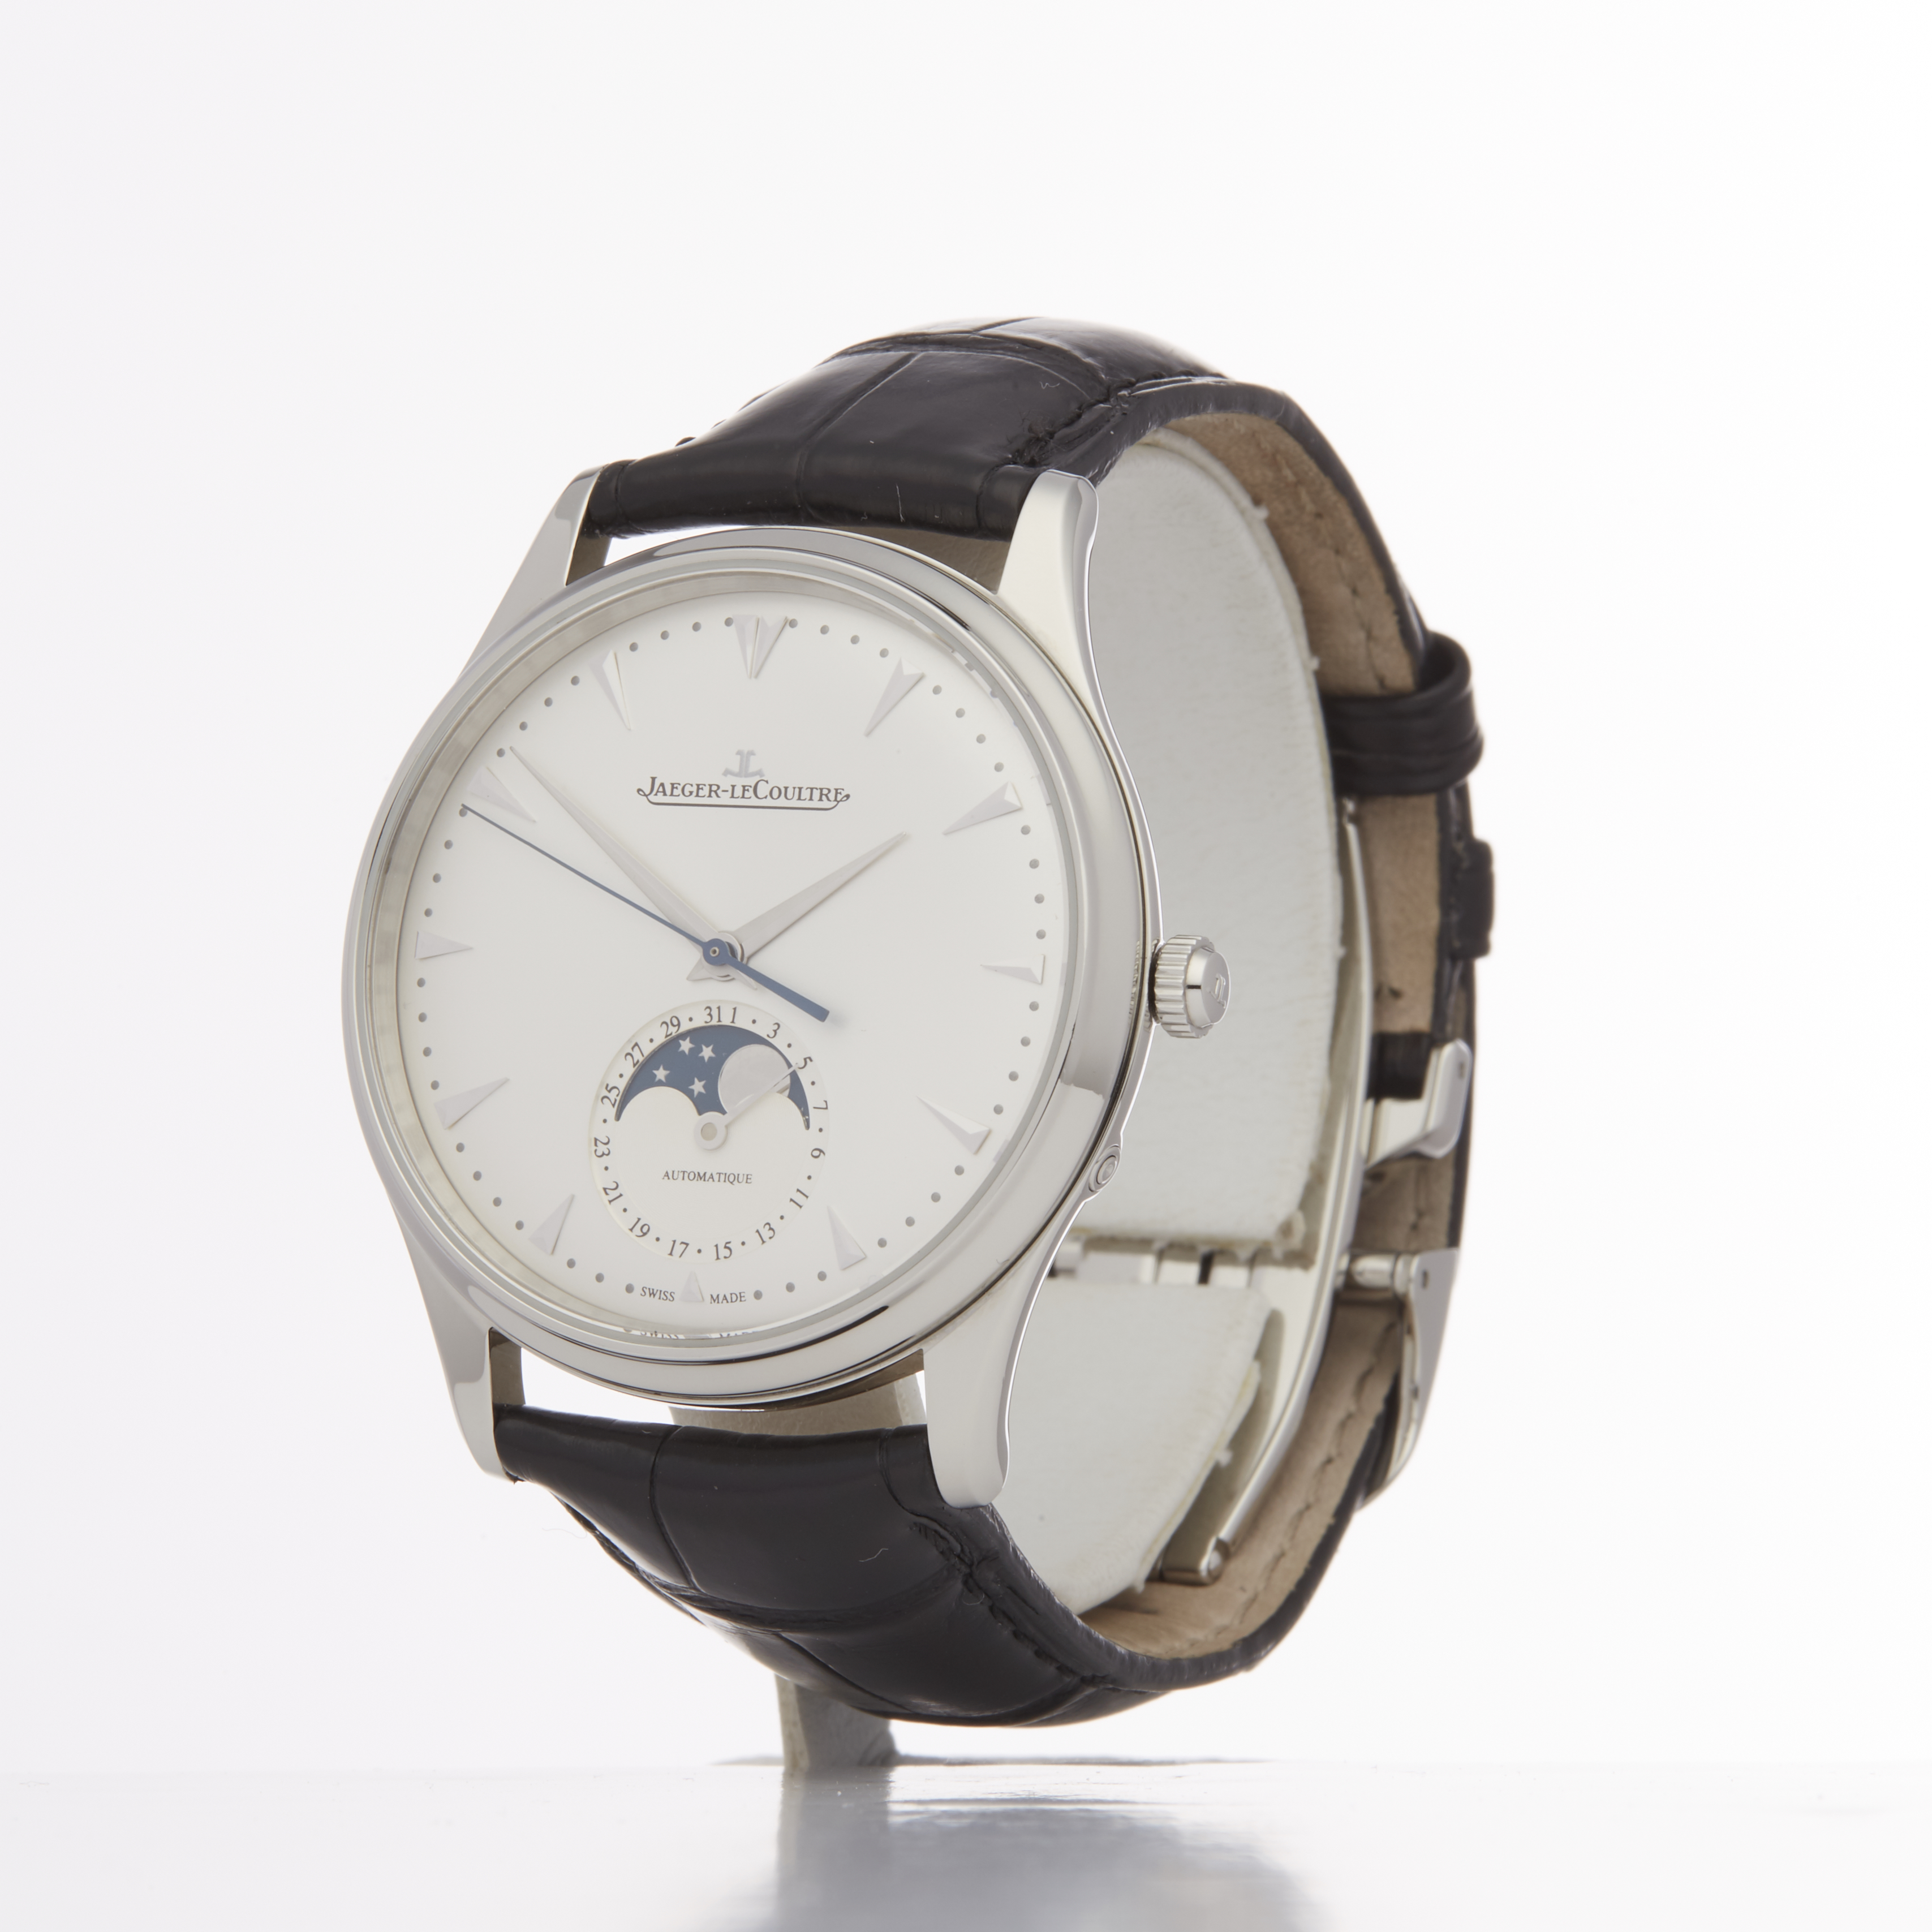 Jaeger-LeCoultre Master Ultra Thin 0 Q1368420 Men Stainless Steel Watch - Image 7 of 7